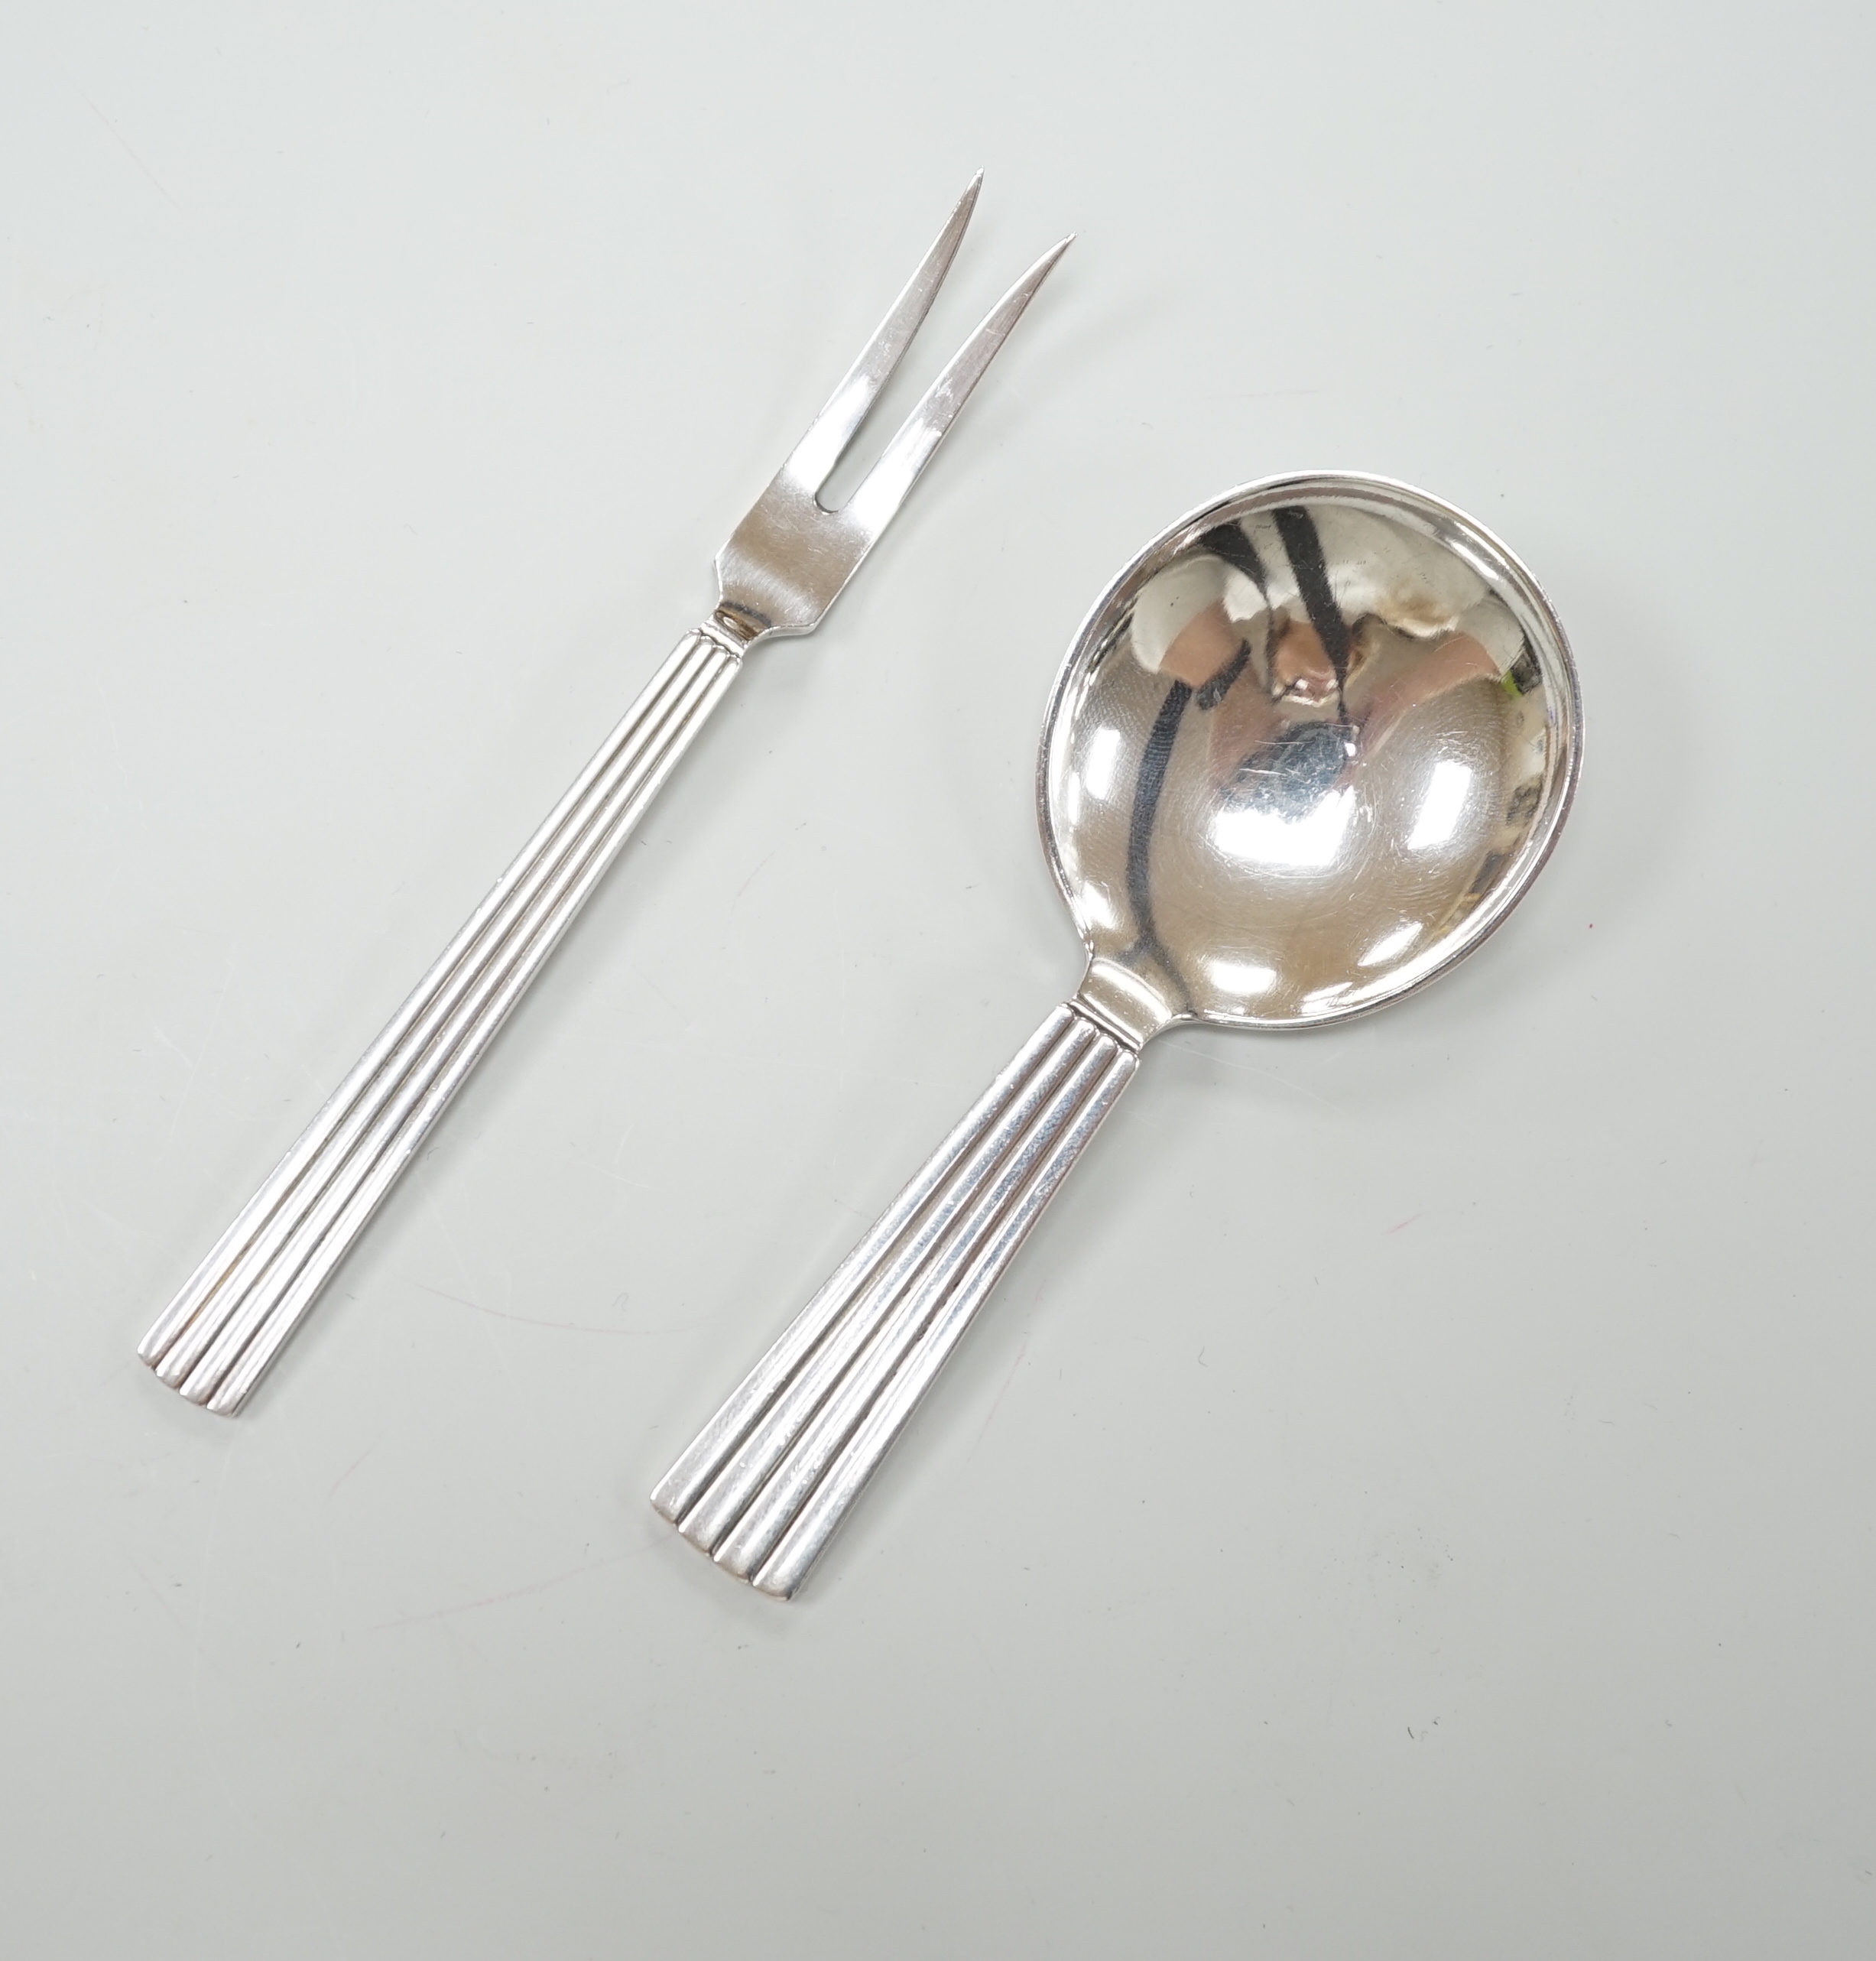 A Georg Jensen sterling christening spoon and fork set, 1945-1951 Sigvard Bernadotte design, not import marked, with associated box                                                                                         